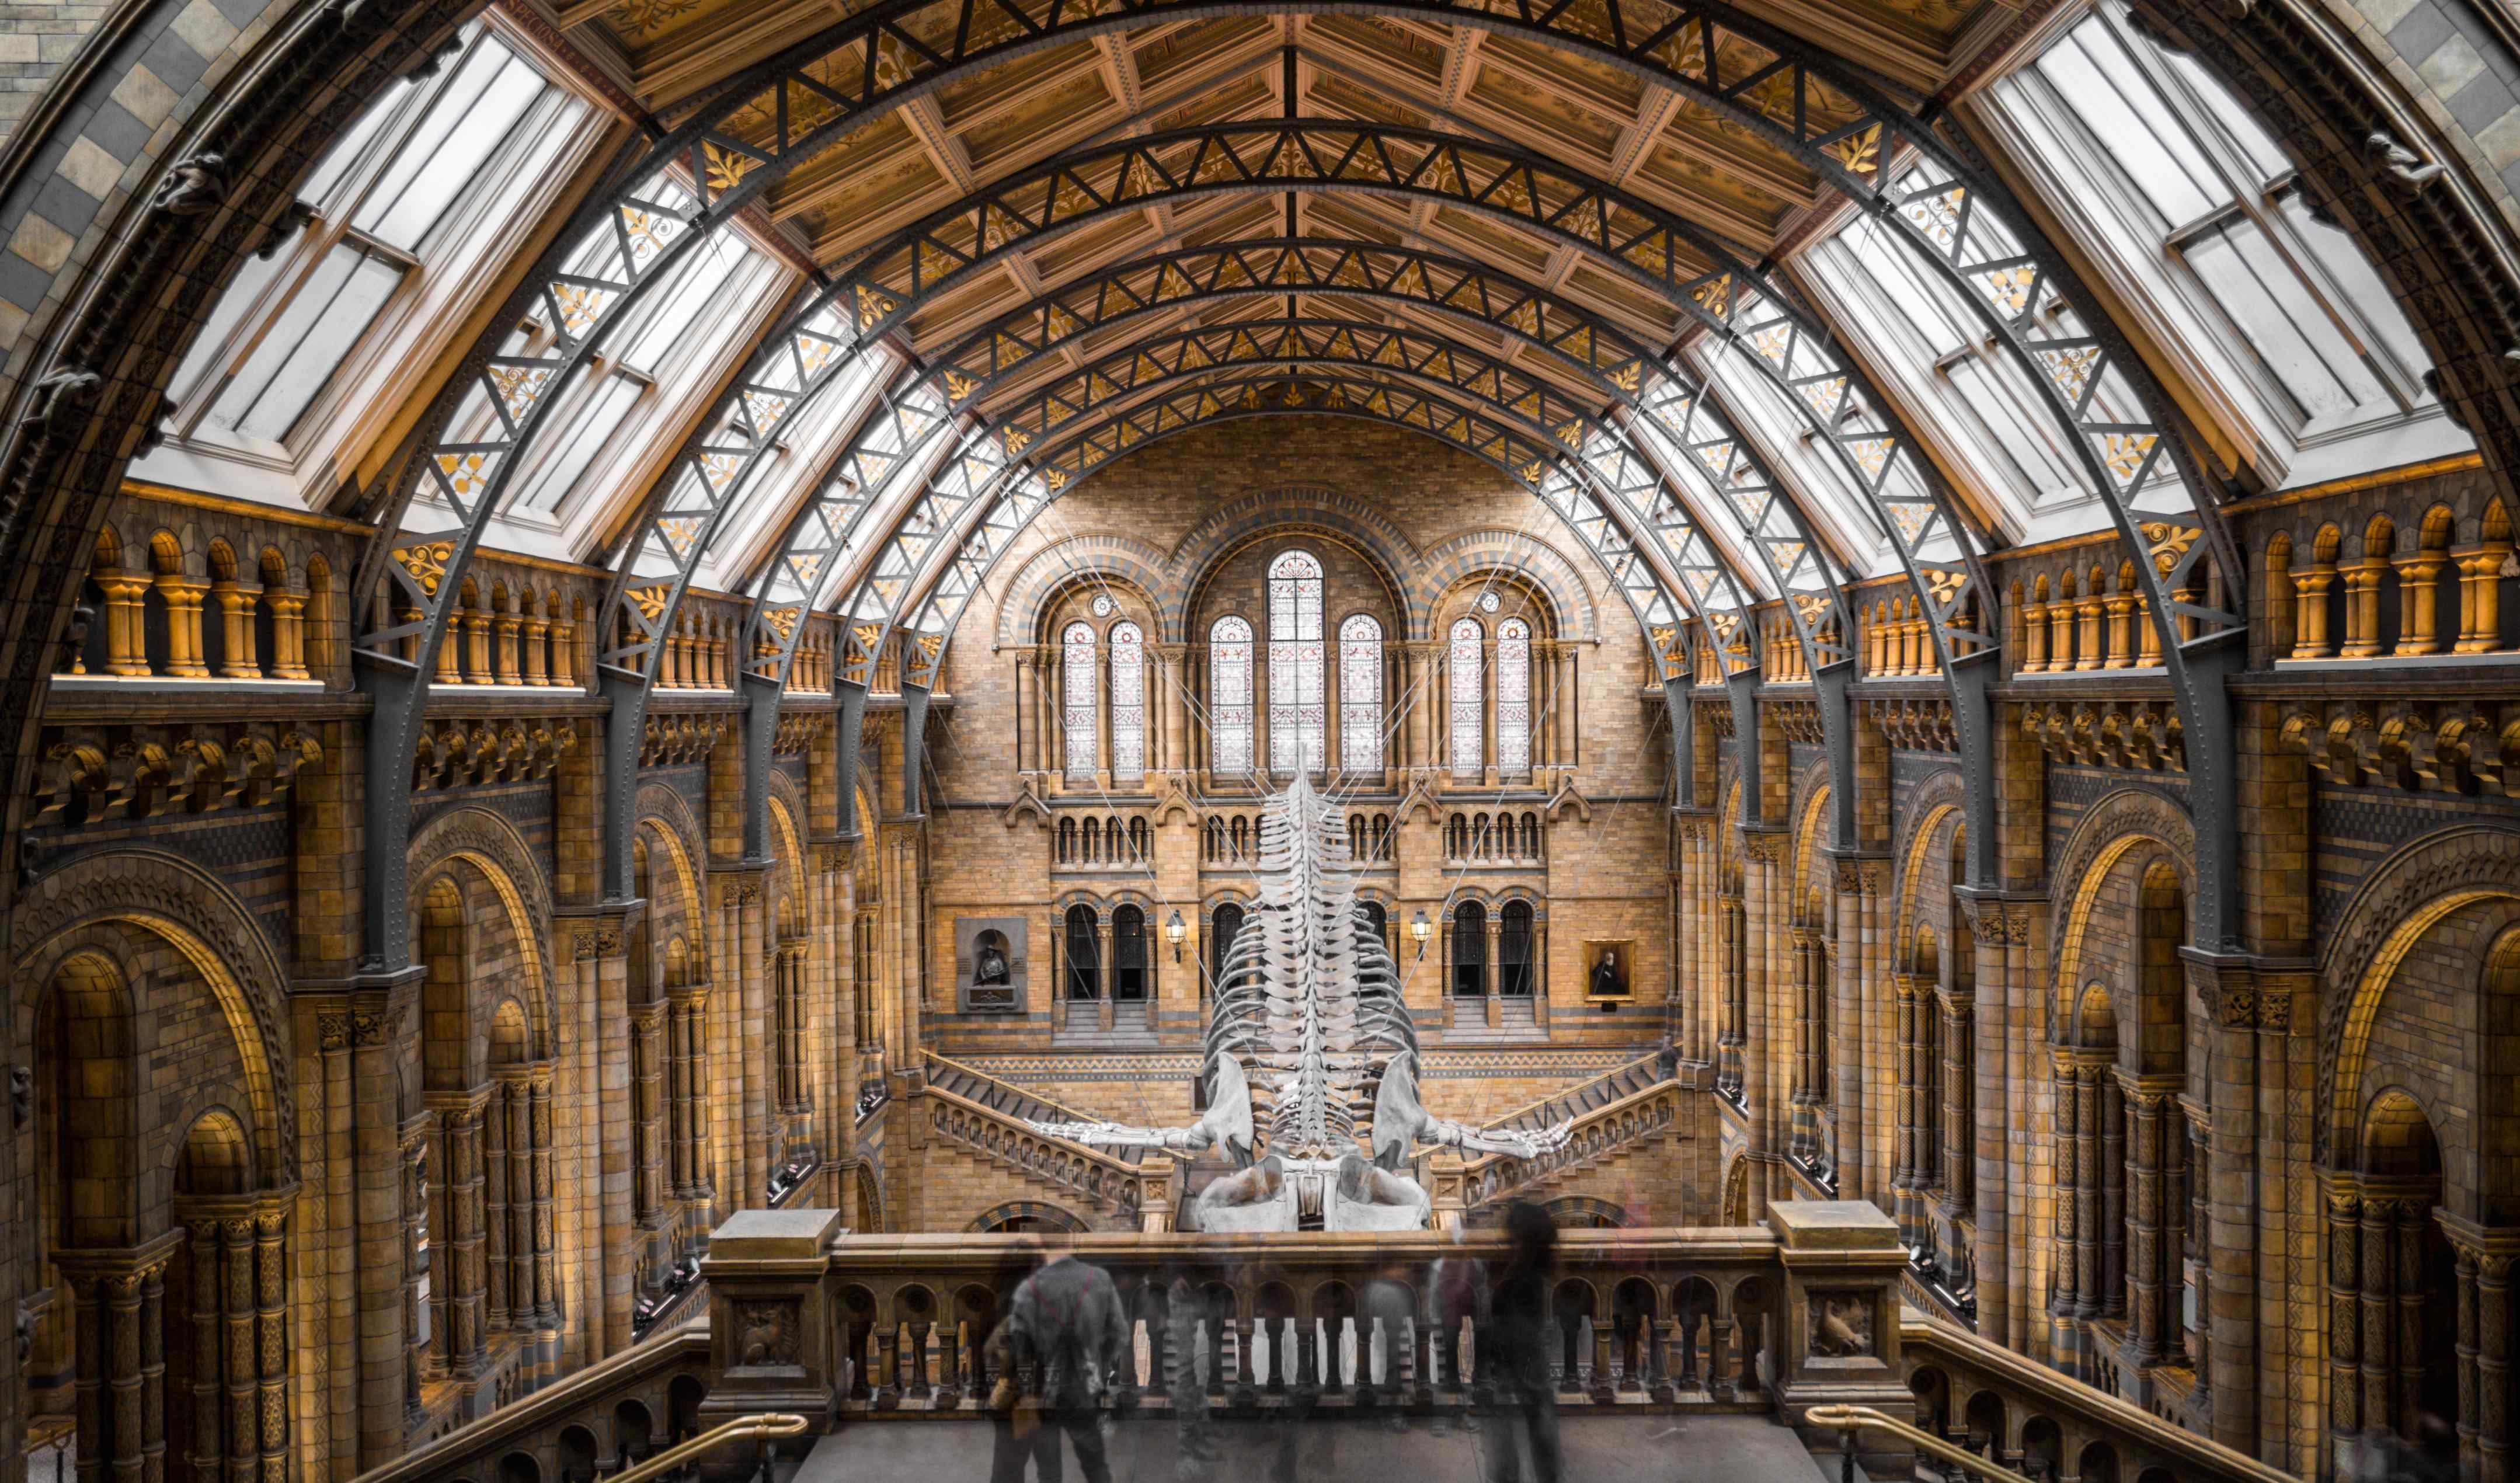 Trip to Natural History Museum